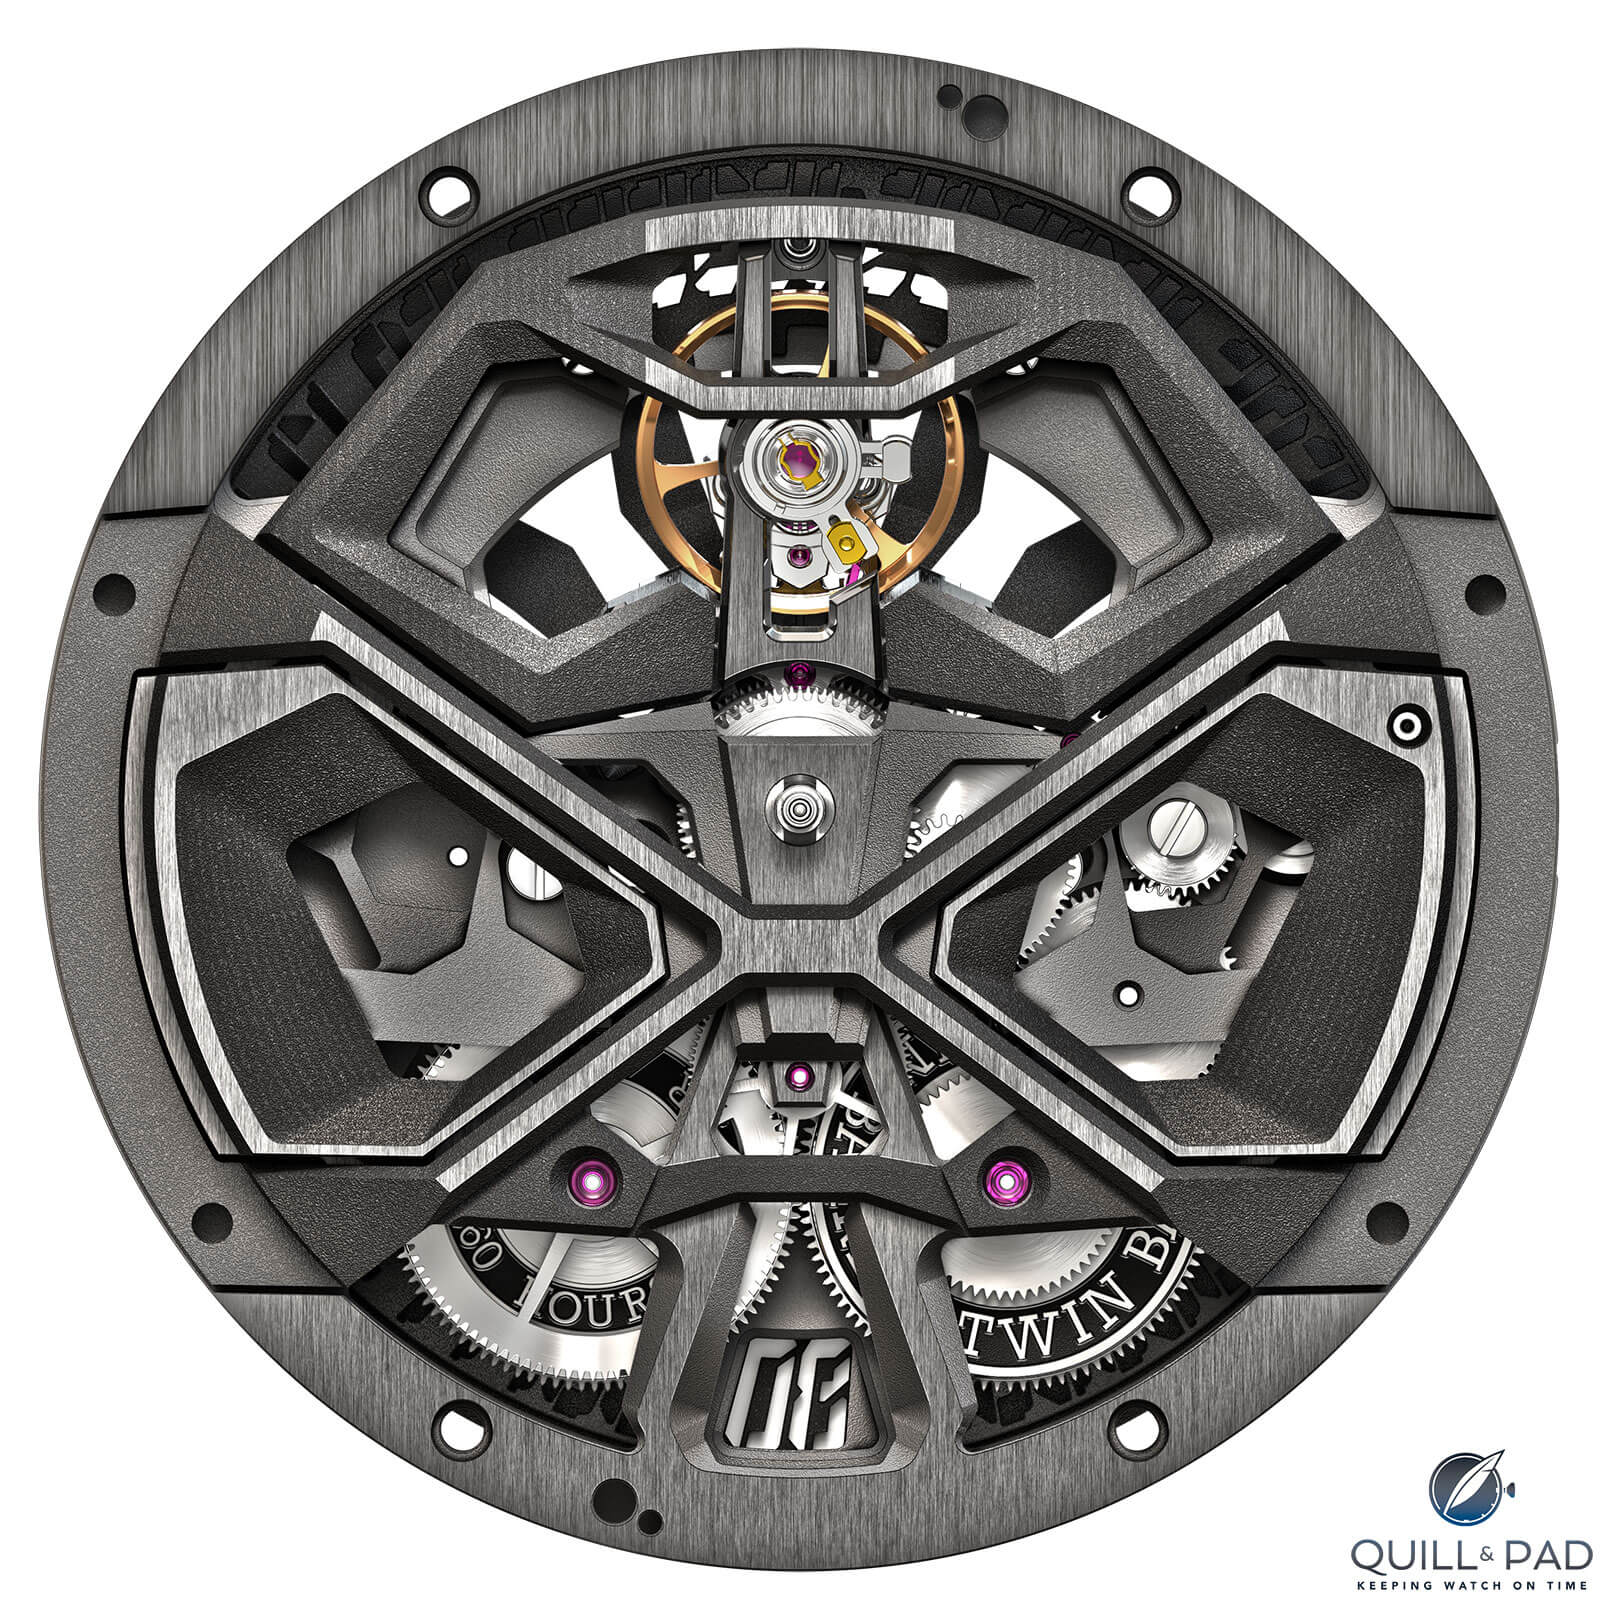 Roger Dubuis Caliber RD60 powers the Excalibur Huracán Performante